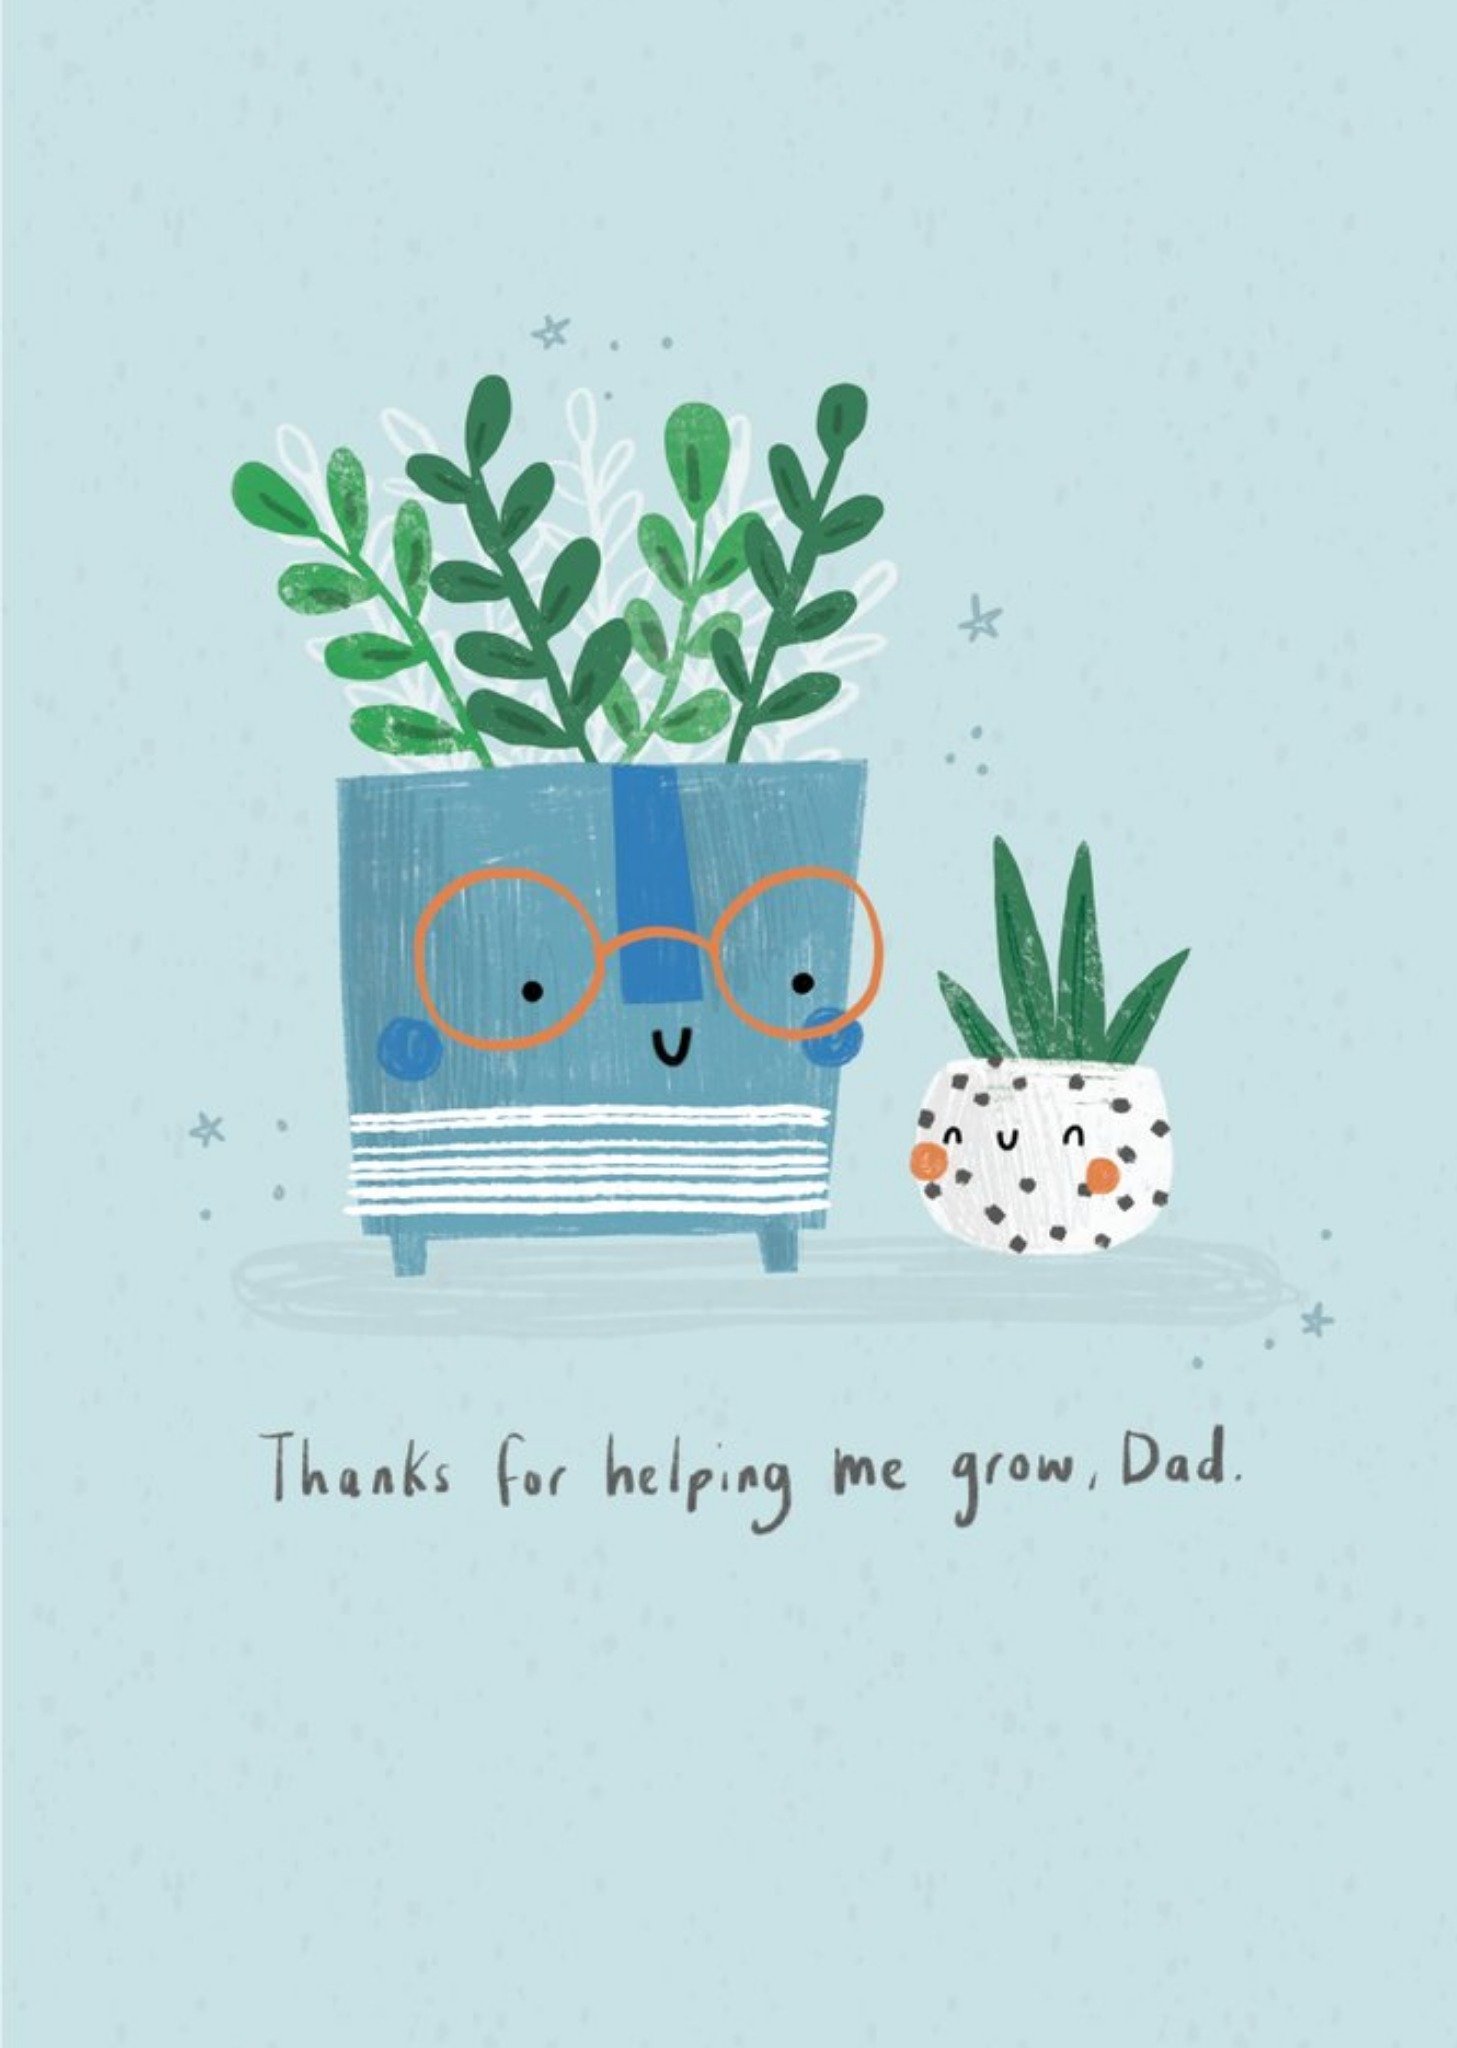 Moonpig Jess Moorhouse Illustrated Plants Cute Father's Day Card Ecard